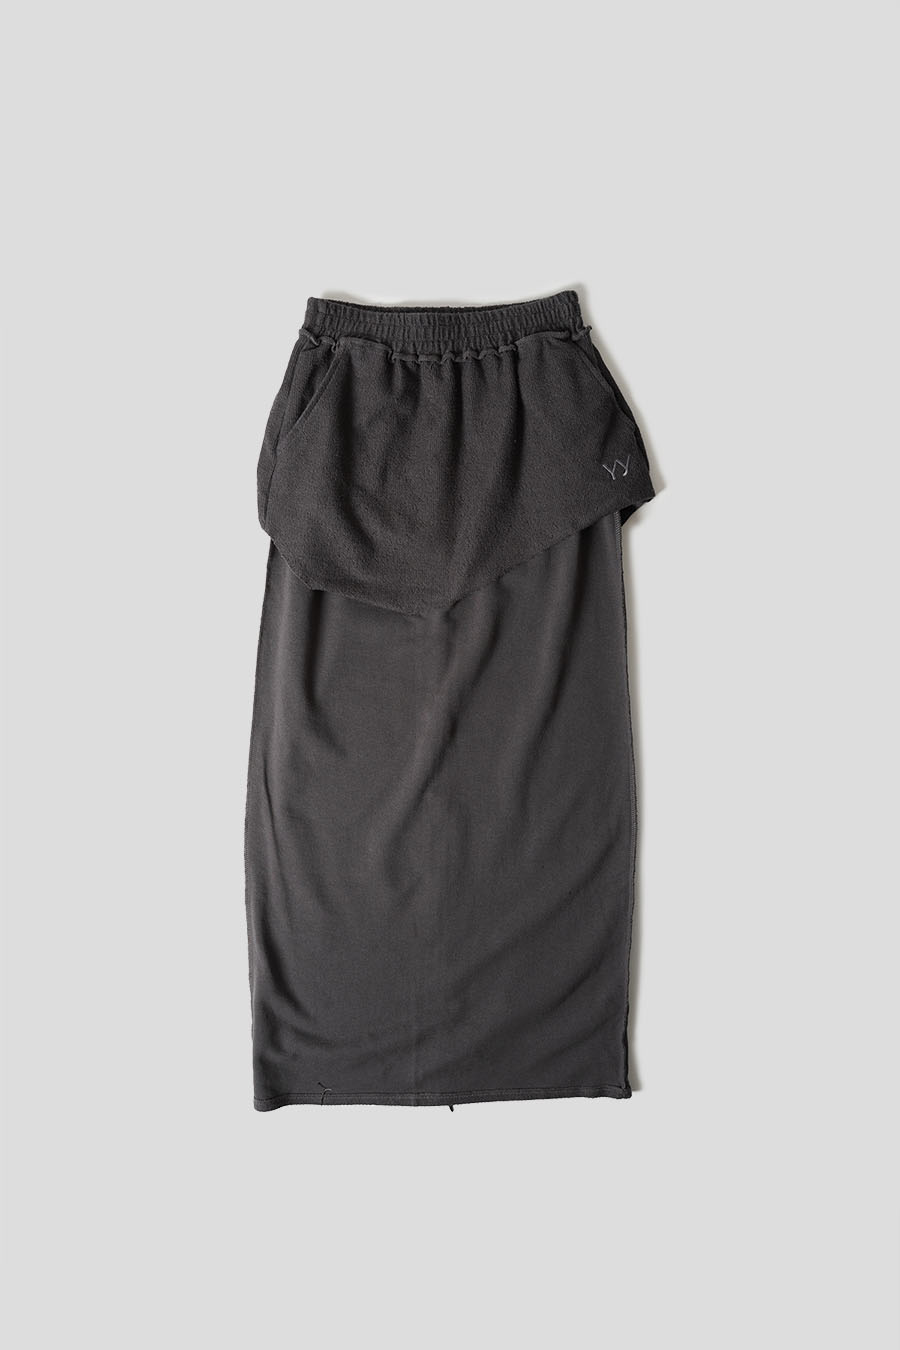 Open YY - LONG LAYERED SKIRT ANTHRACITE - LE LABO STORE